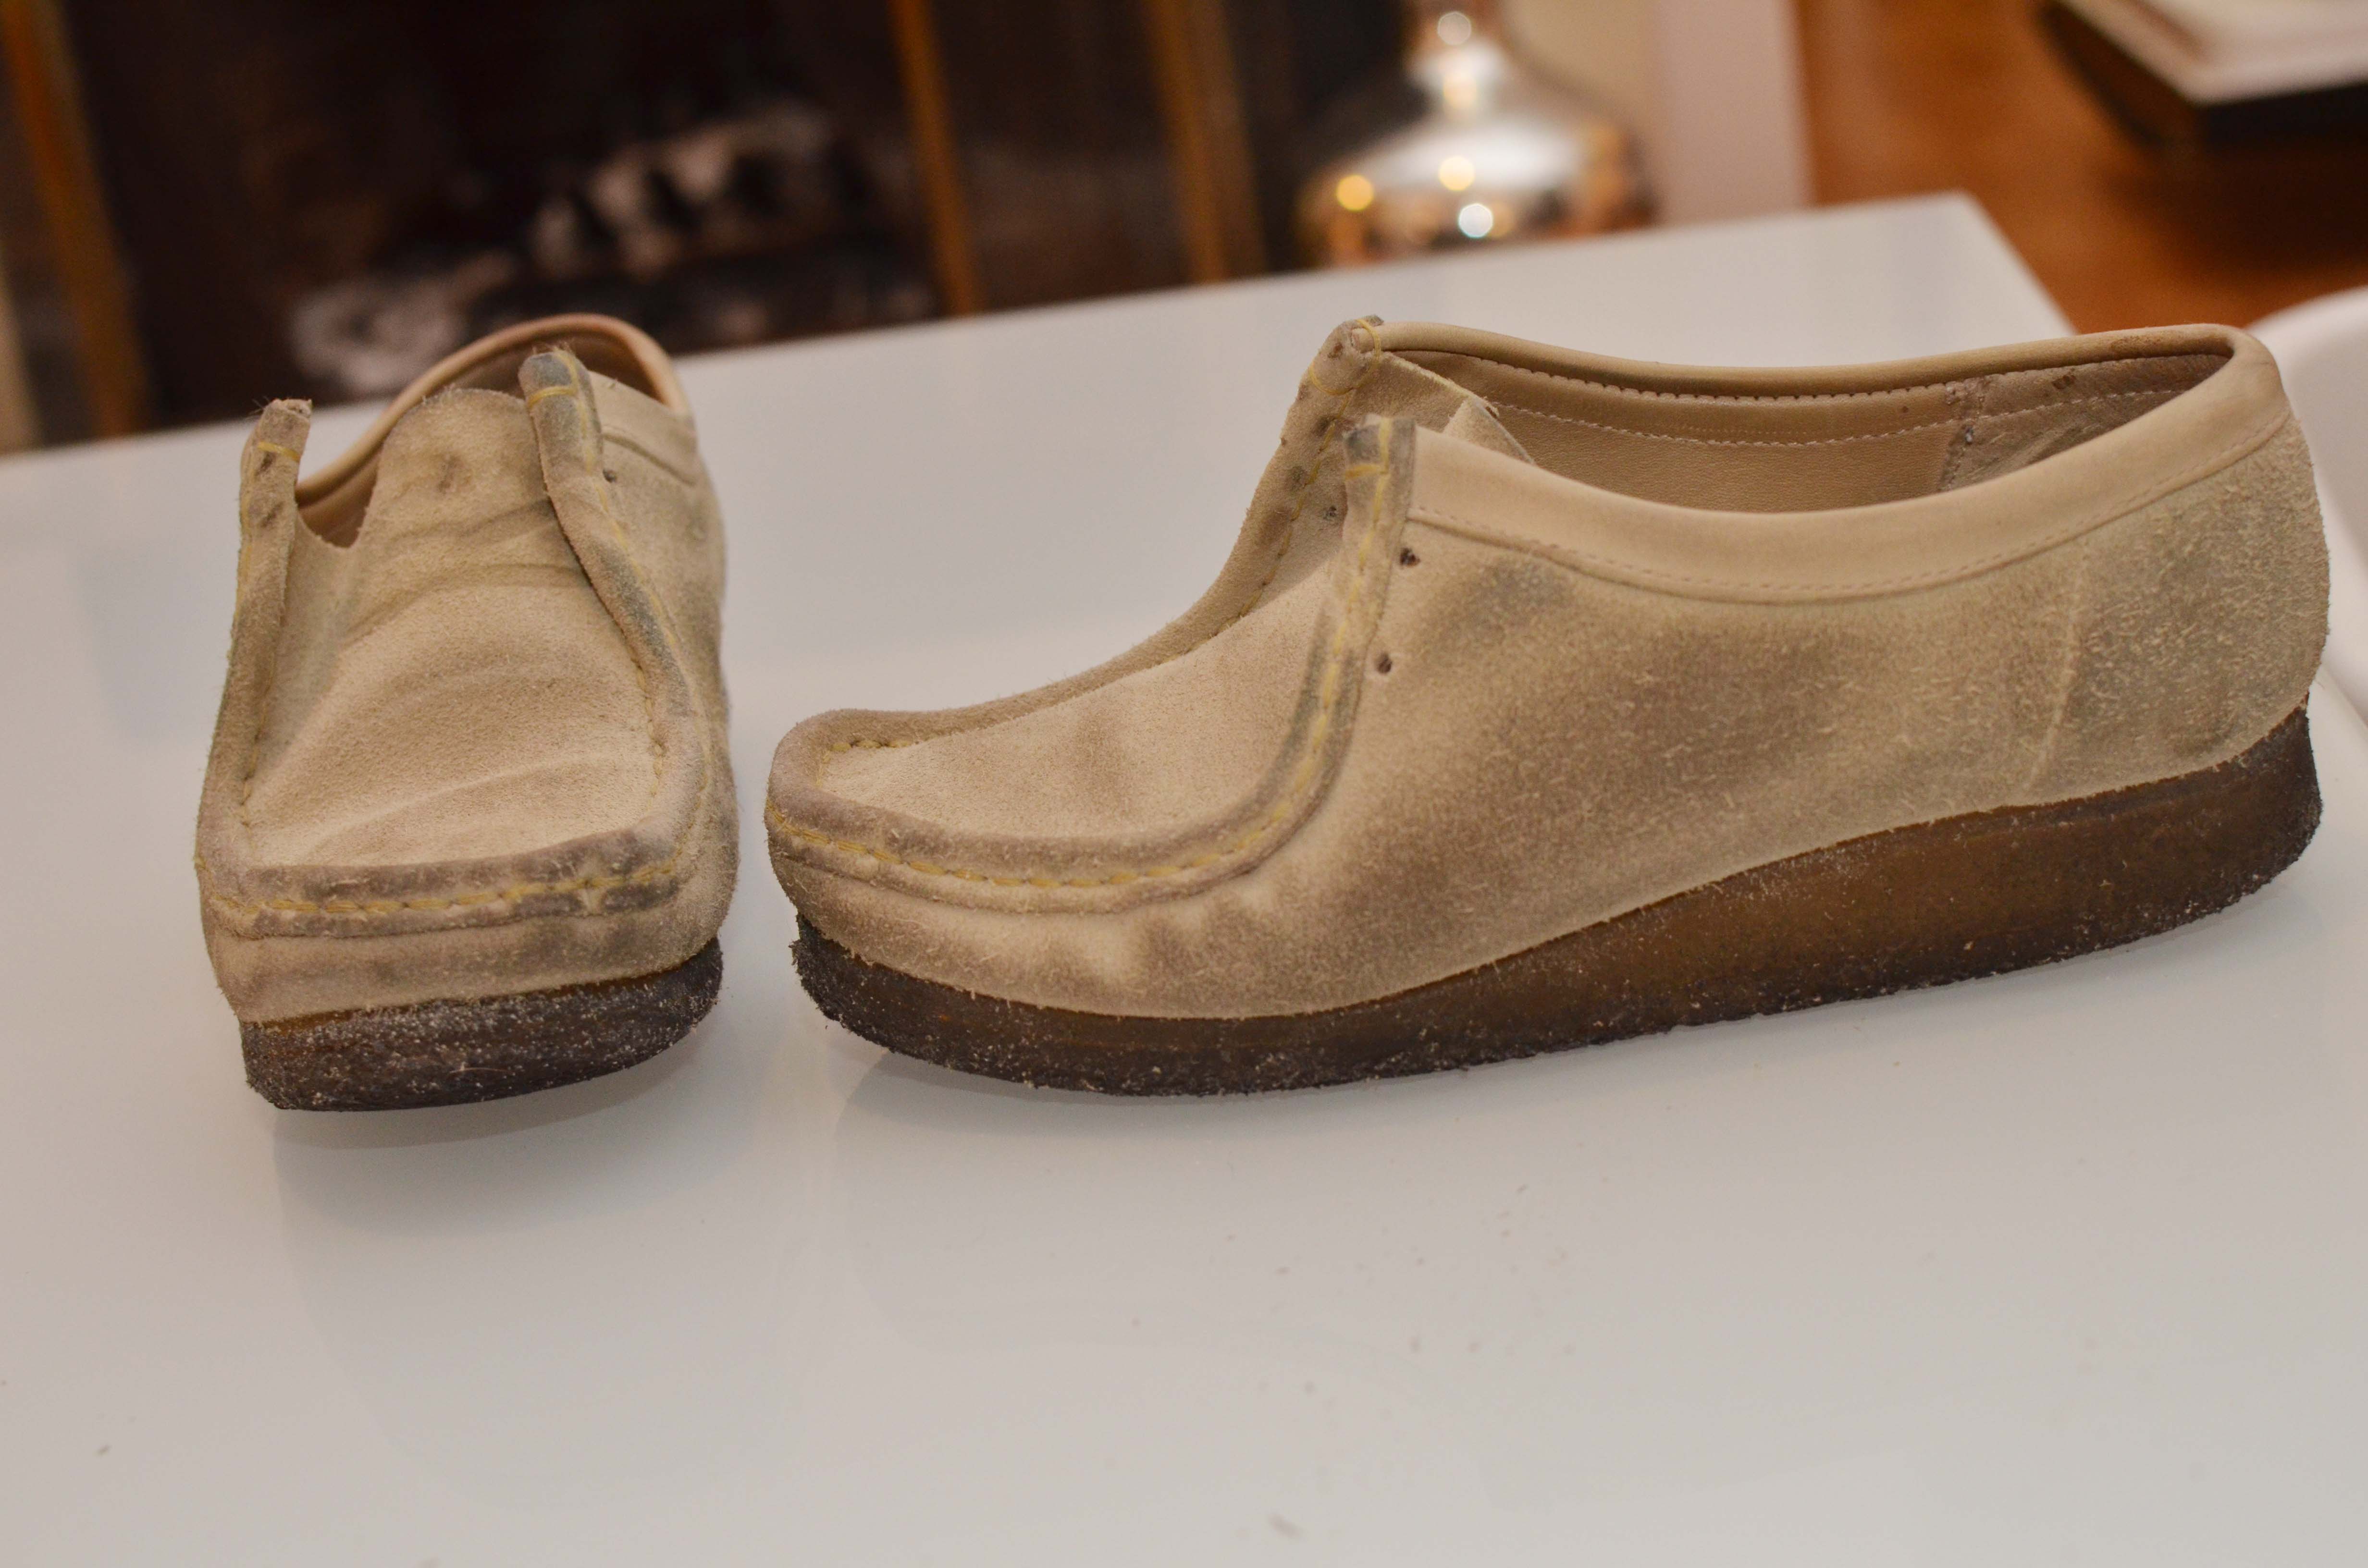 cleaning clarks nubuck shoes